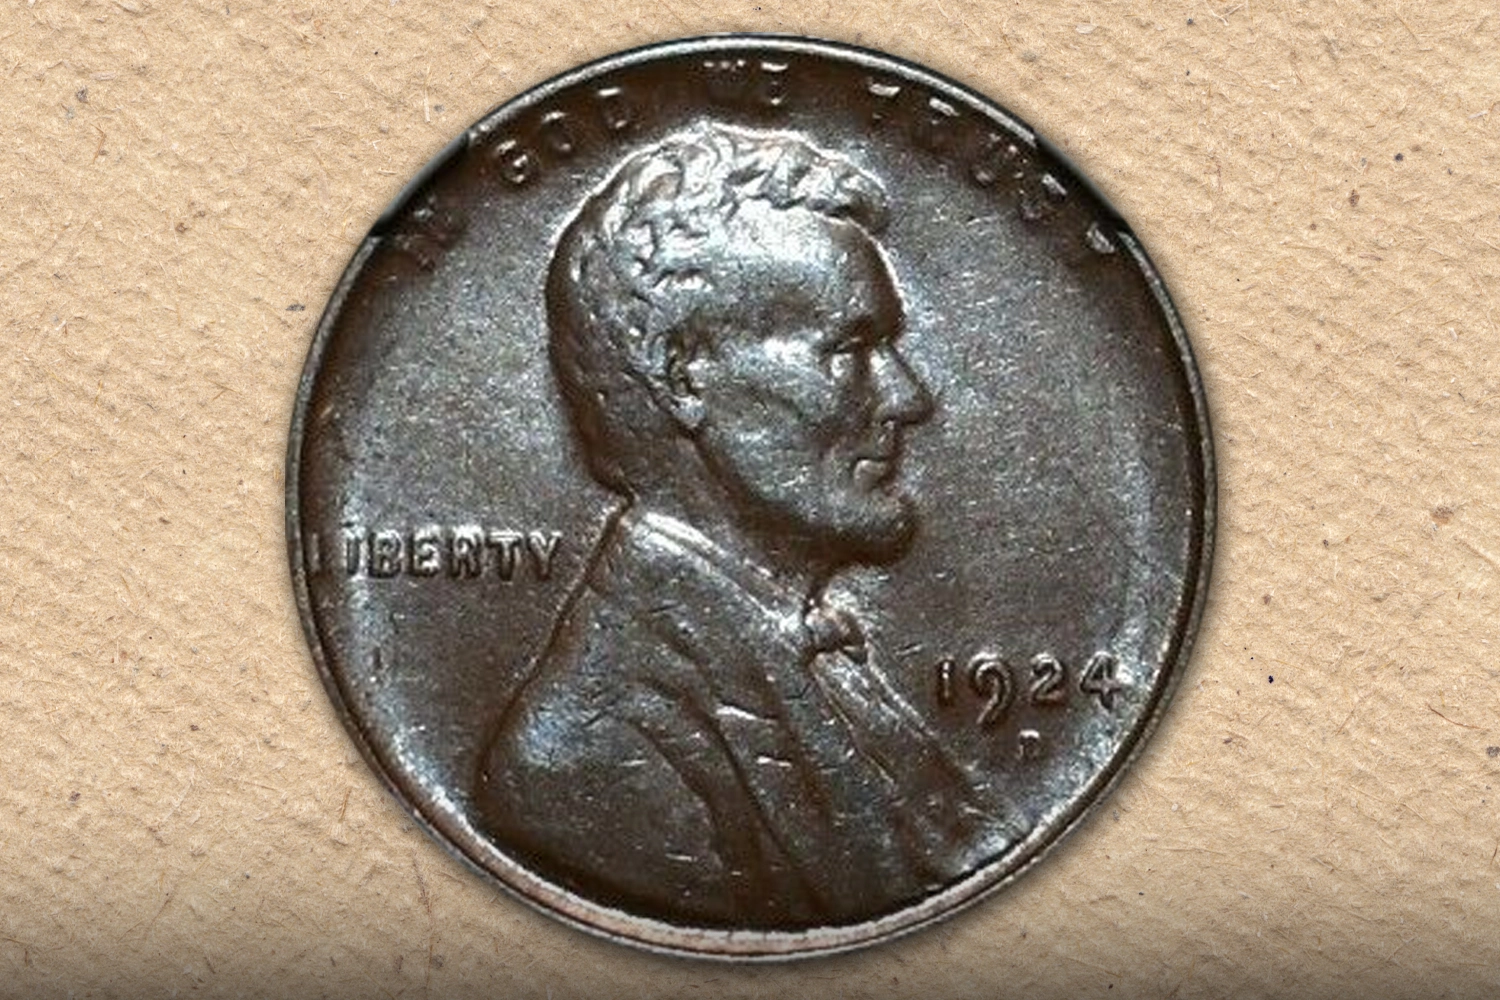 Factors Influencing the Value of the 1924 Penny